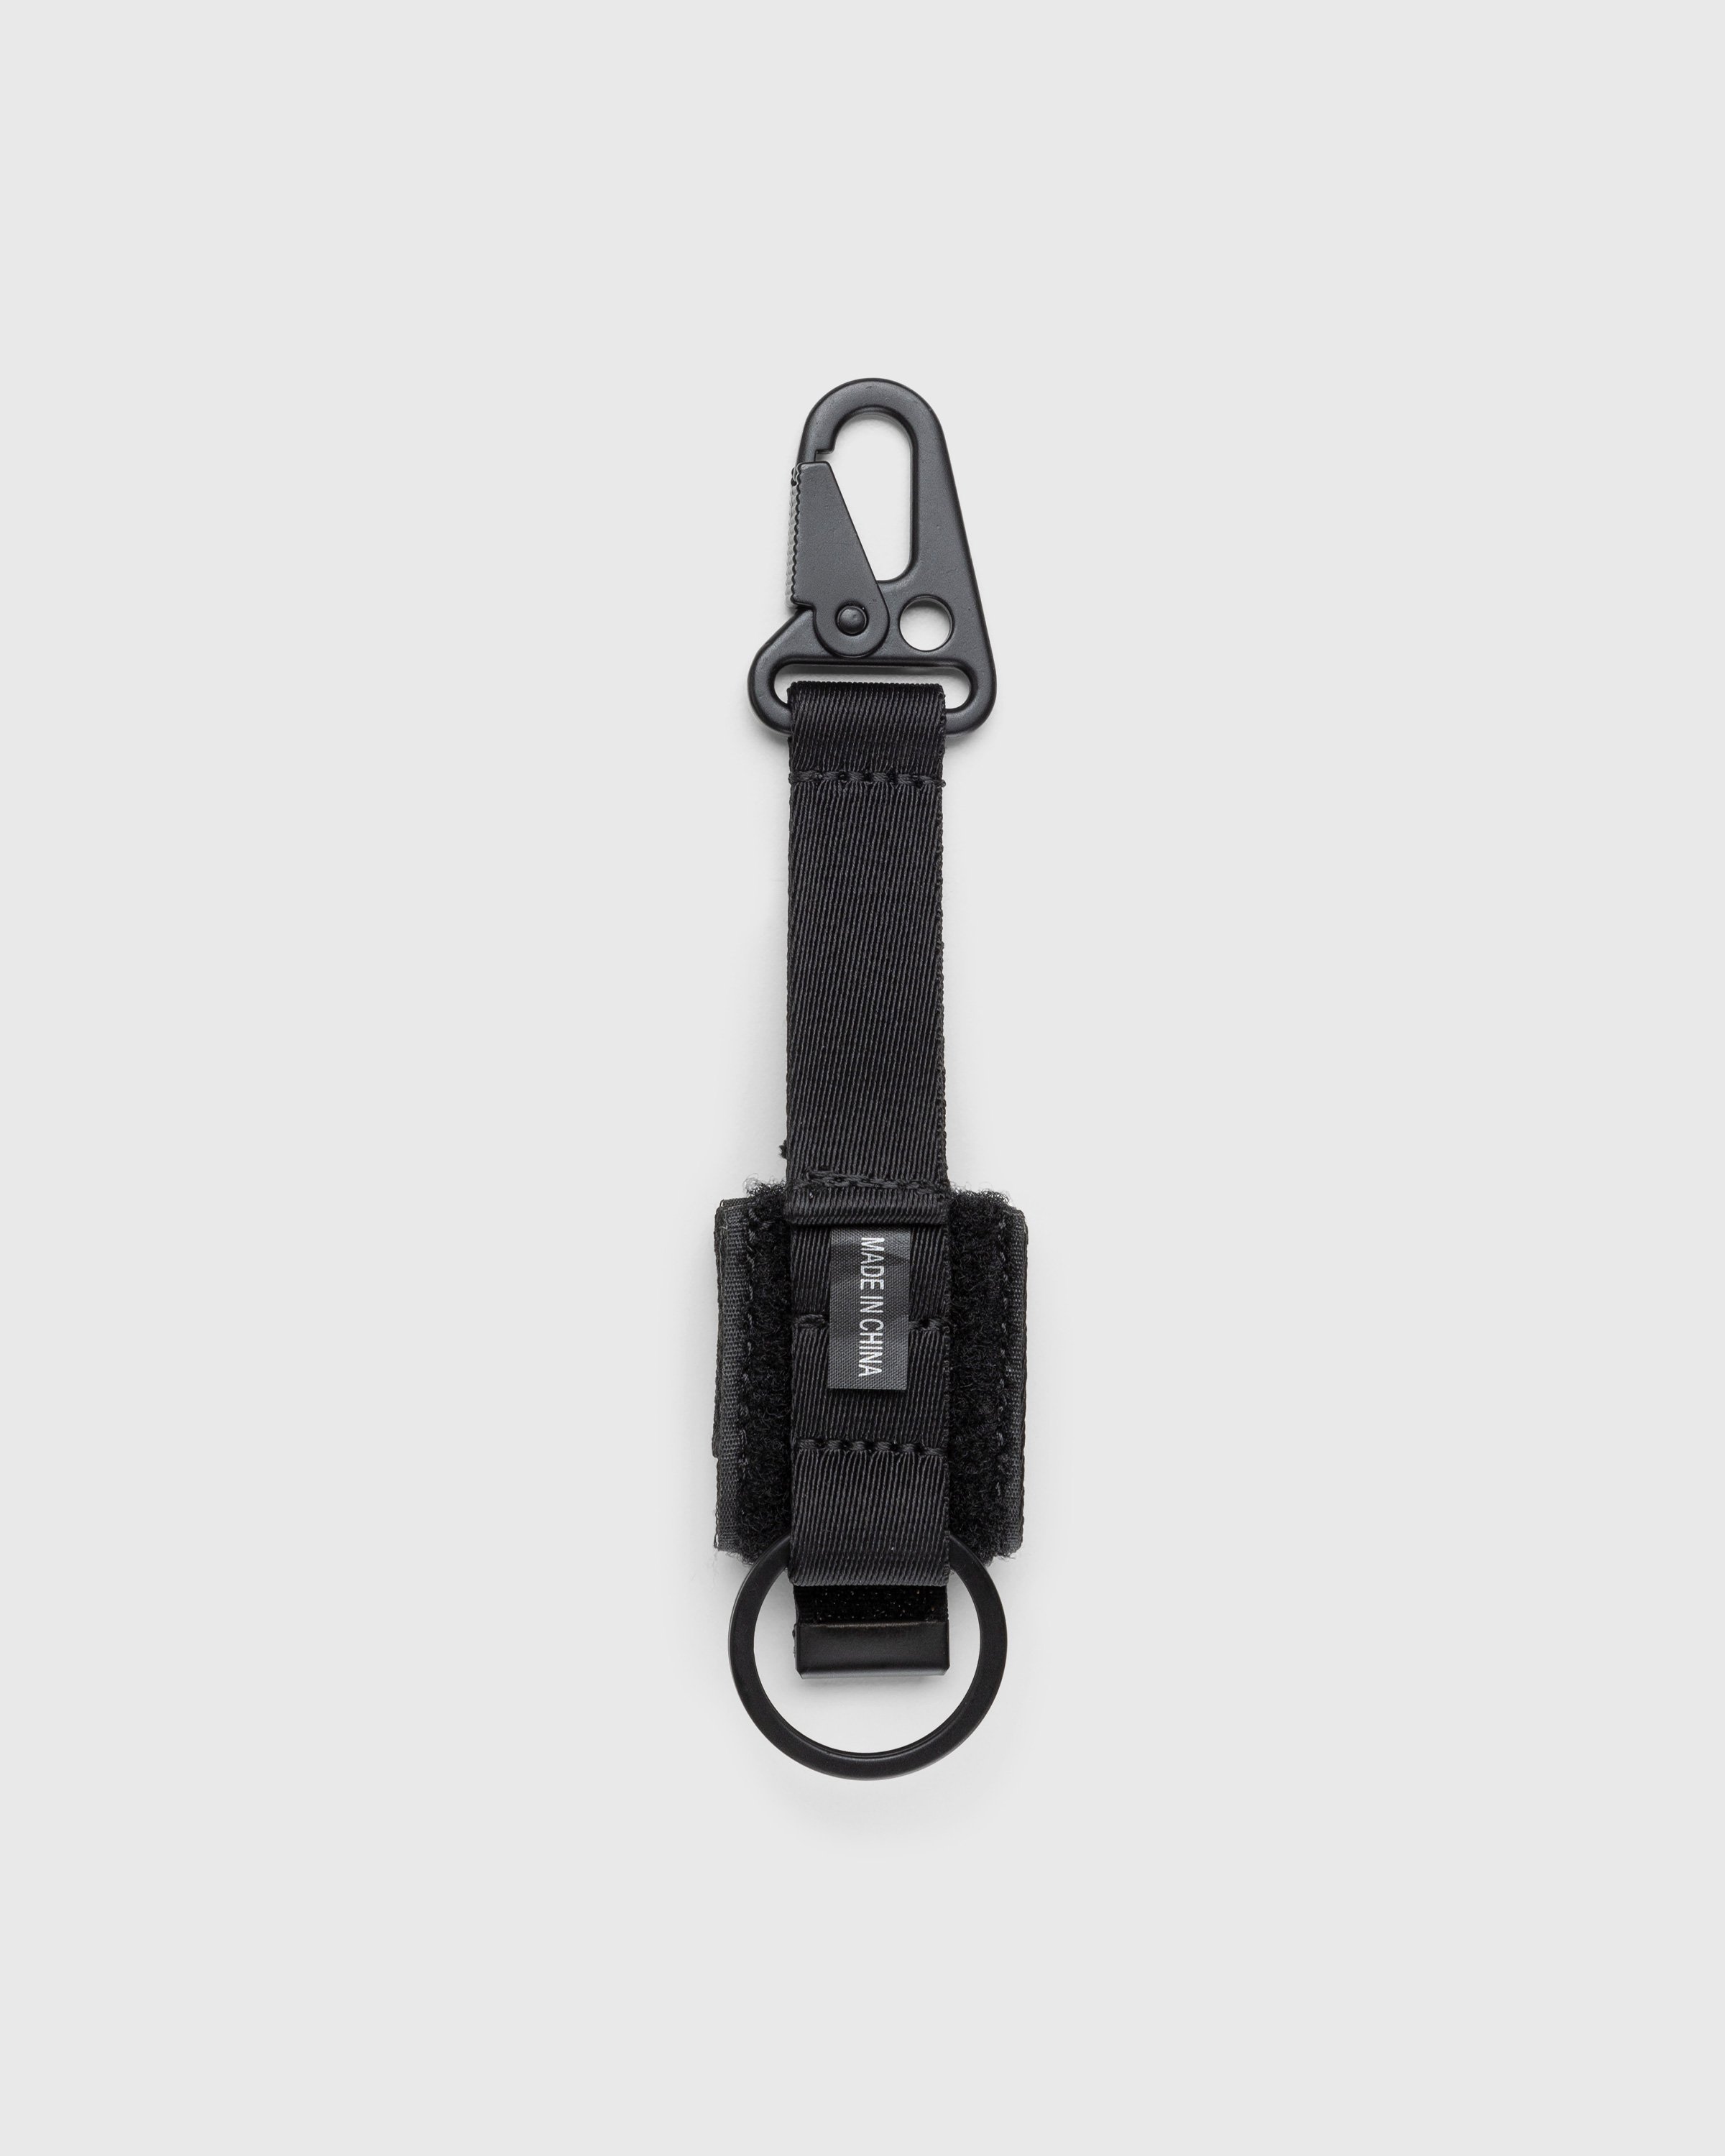 Stone Island - AirPods Case With Key Holder Black - Accessories - Black - Image 2